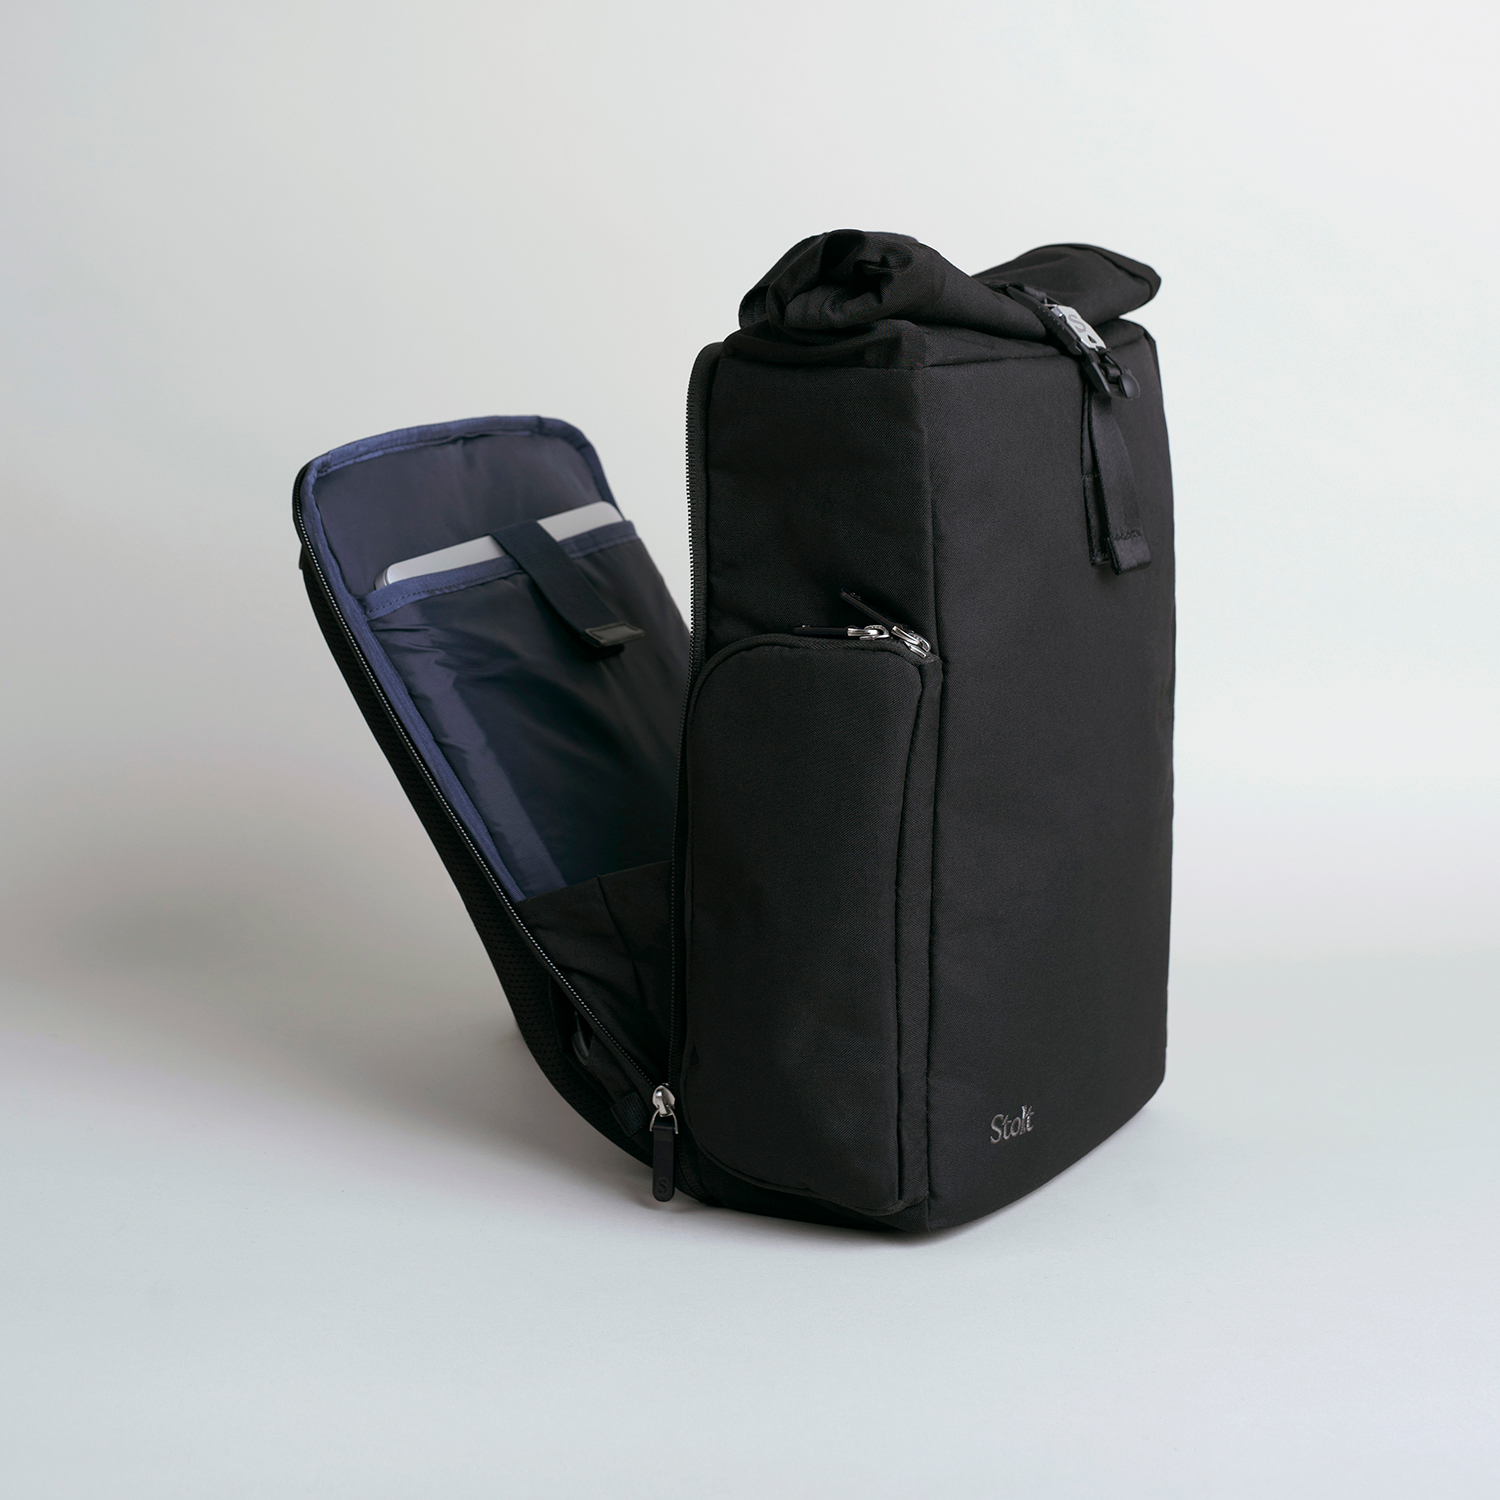 Roll-top Commuting rucksack with laptop compartment